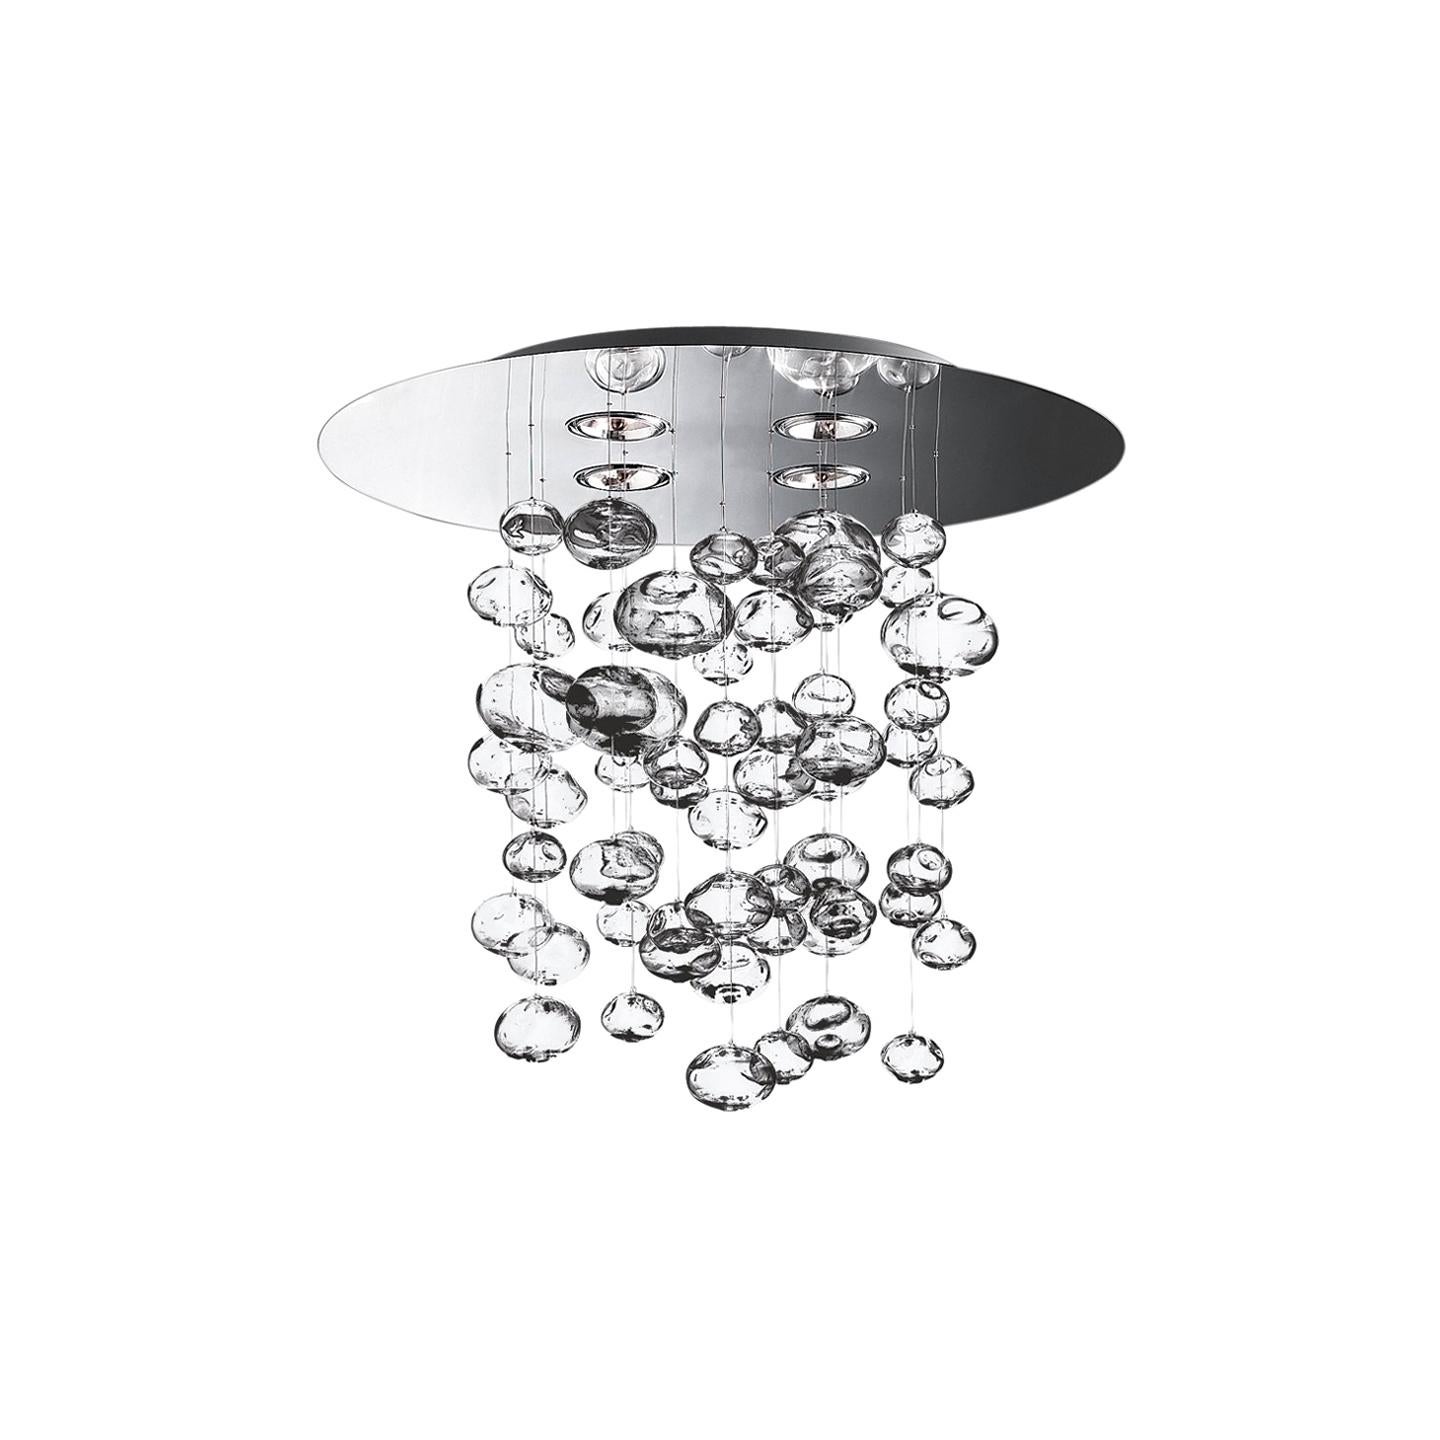 Leucos Ether S 90 Chandelier in Transparent and Polished Steel by Patrick Jouin